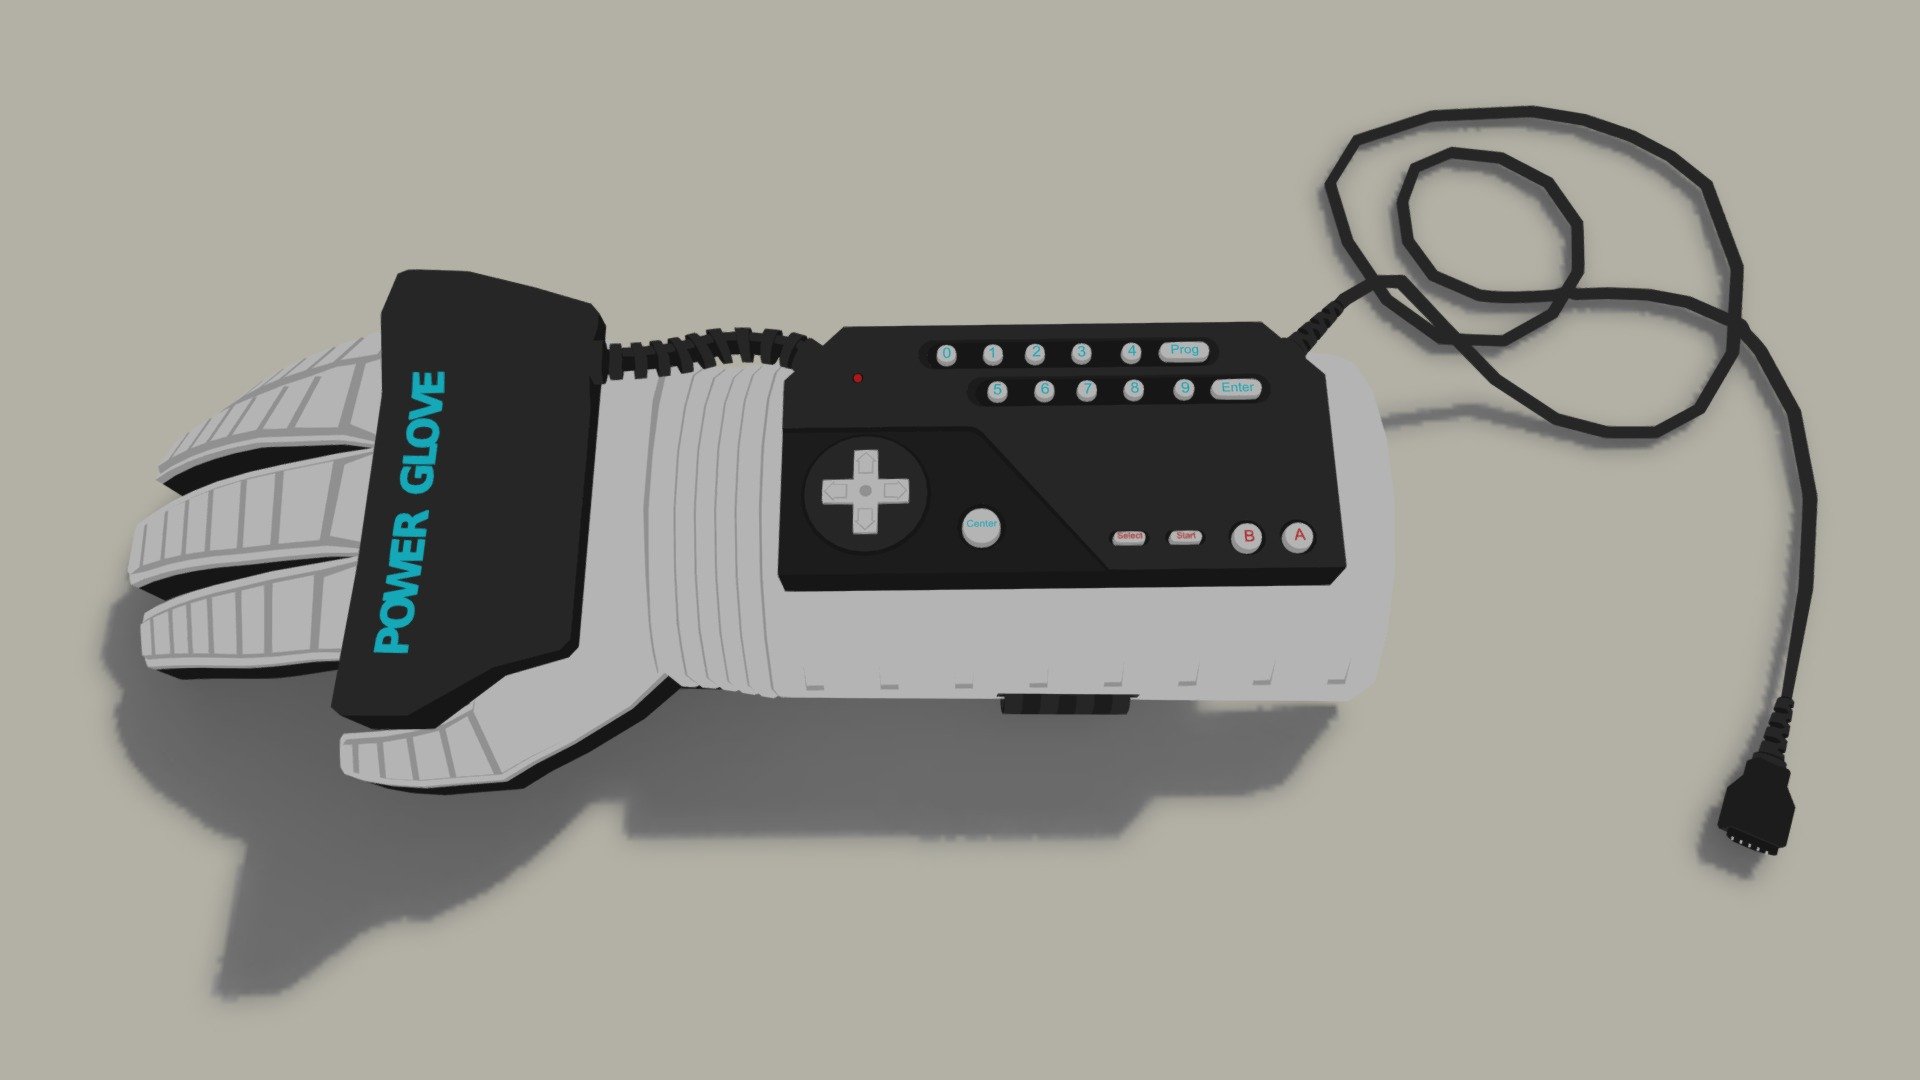 Back with another Friday night Minimal Art Piece.

I thought I would have a crack at a Nintendo Powerglove. Man, these things were awesome back in the day! Wish I had one now&hellip; - Nintendo Powerglove - Buy Royalty Free 3D model by tzeshi (@timvizesi) 3d model